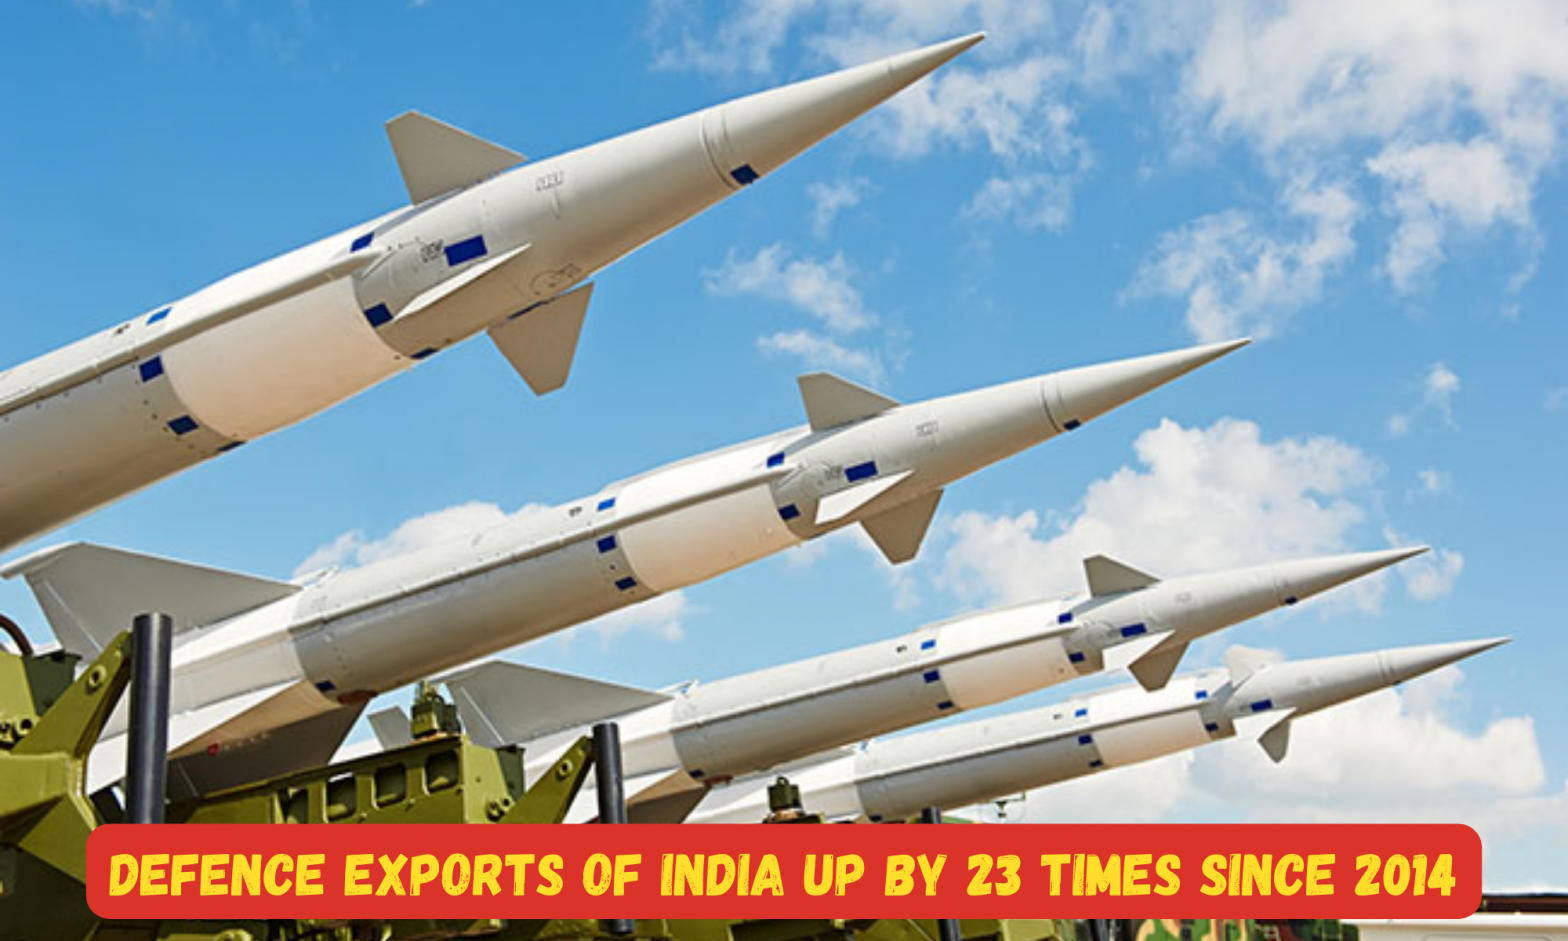 Defence exports of India up by 23 times since 2014